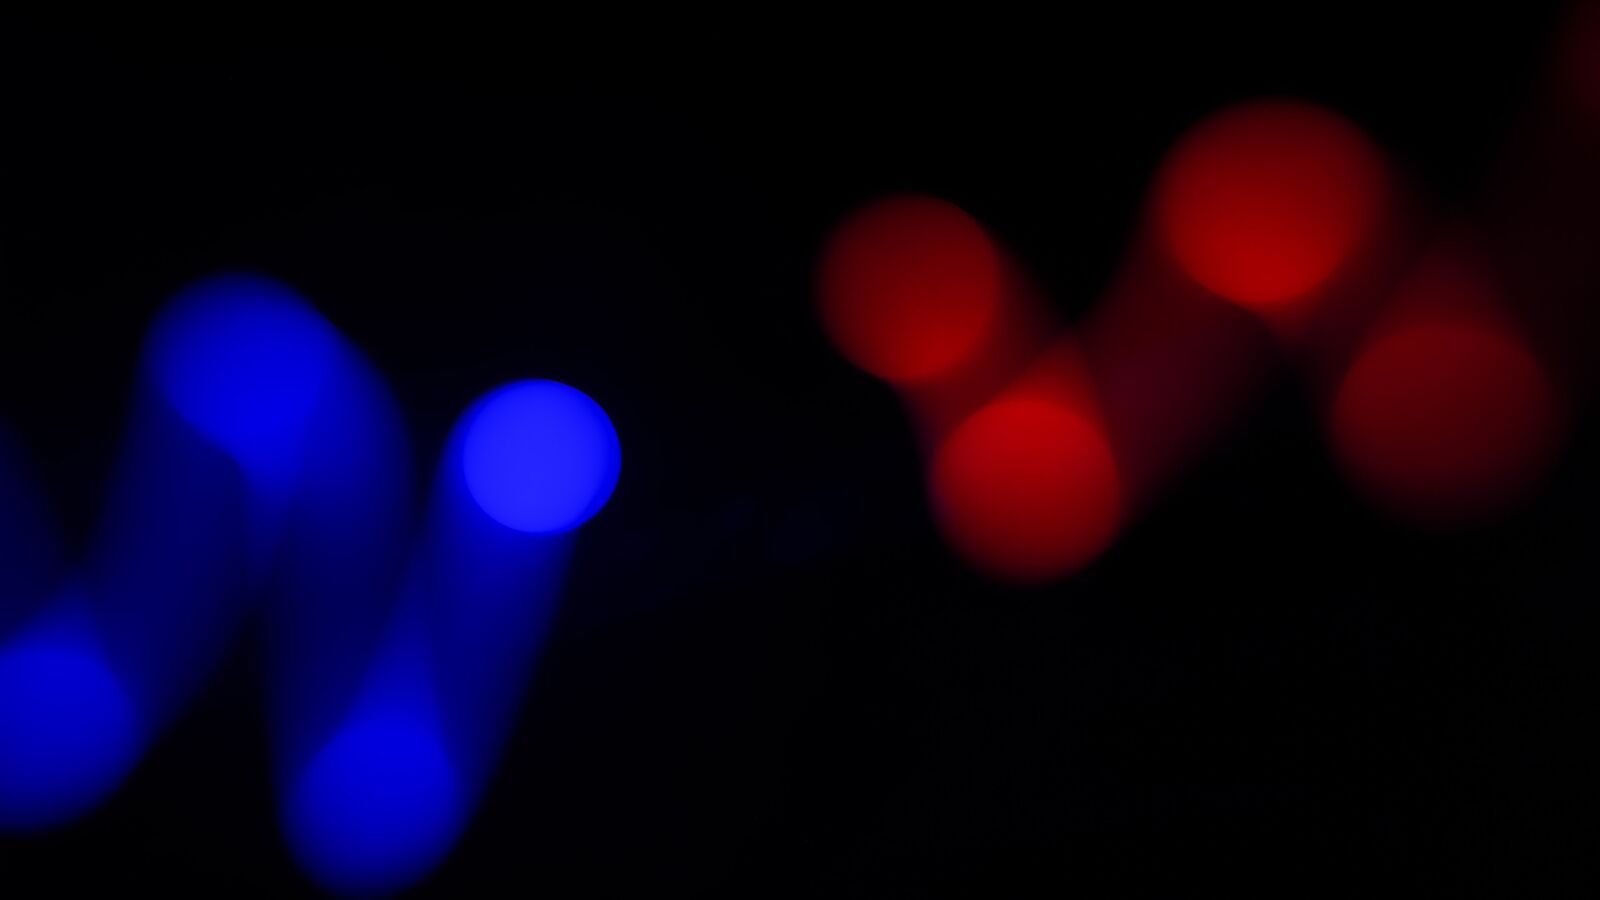 Nokia 808 PureView sample photo. Blue, red, lights photography